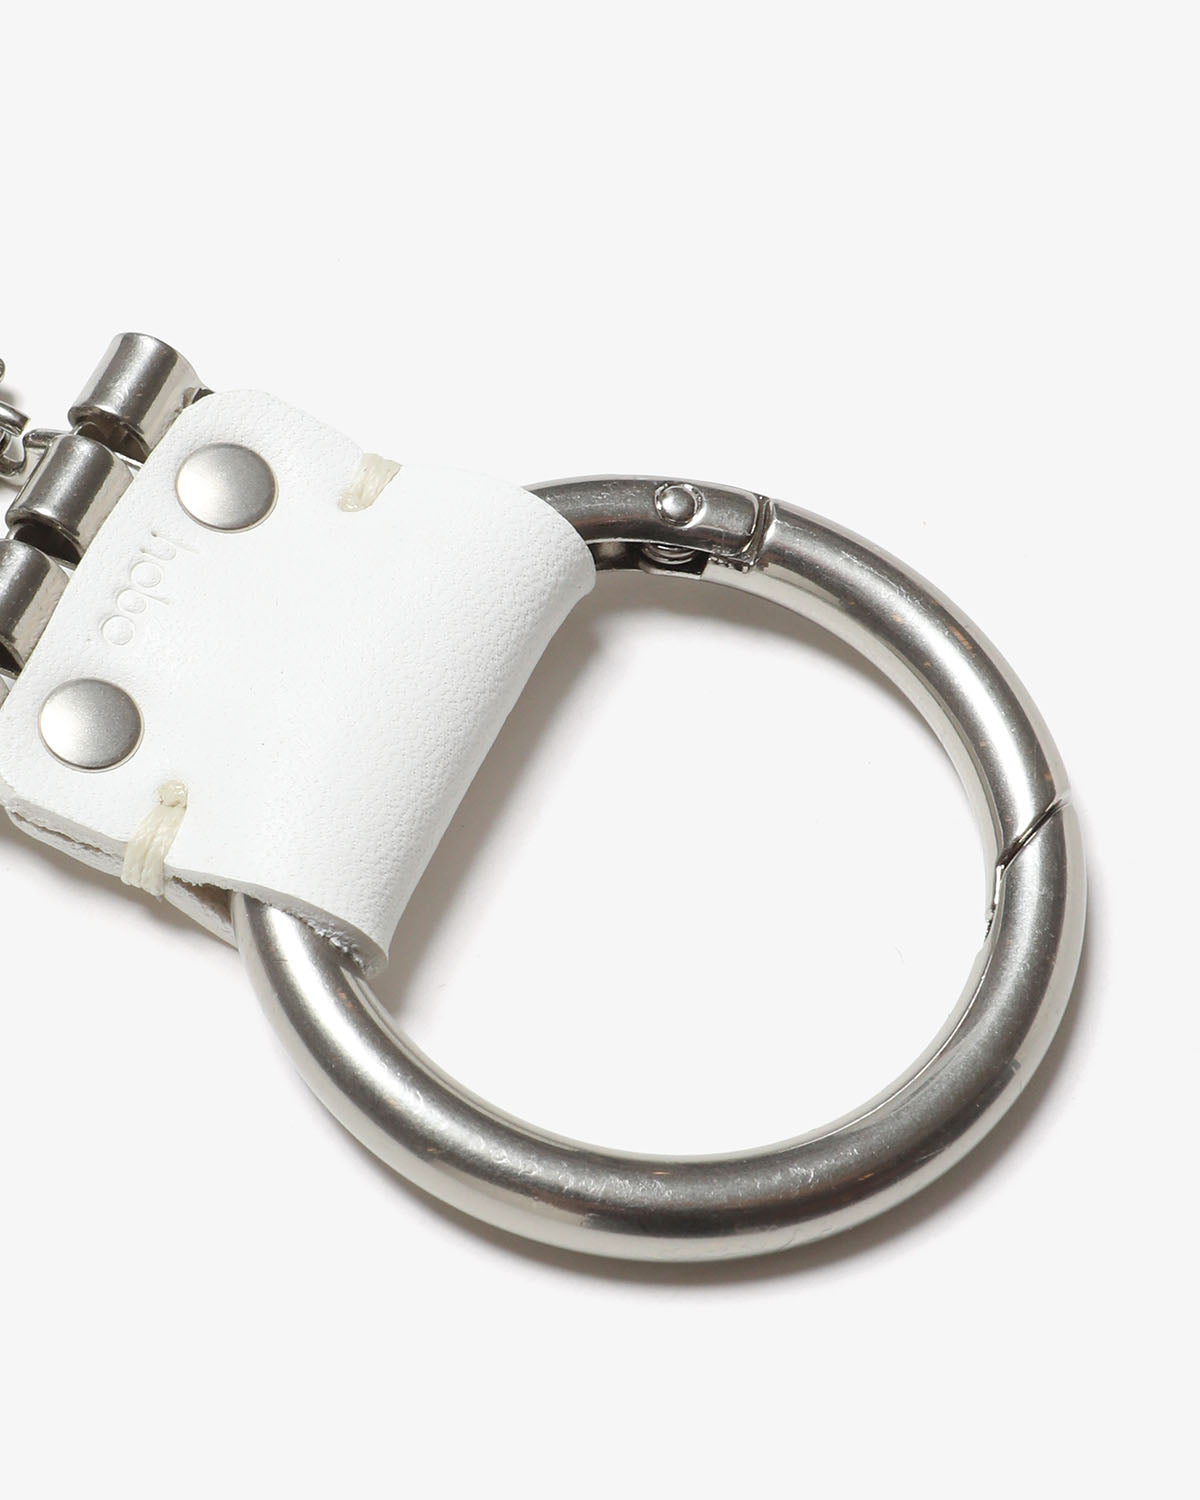 ROUND CARABINER KEY RING with COW LEATHER